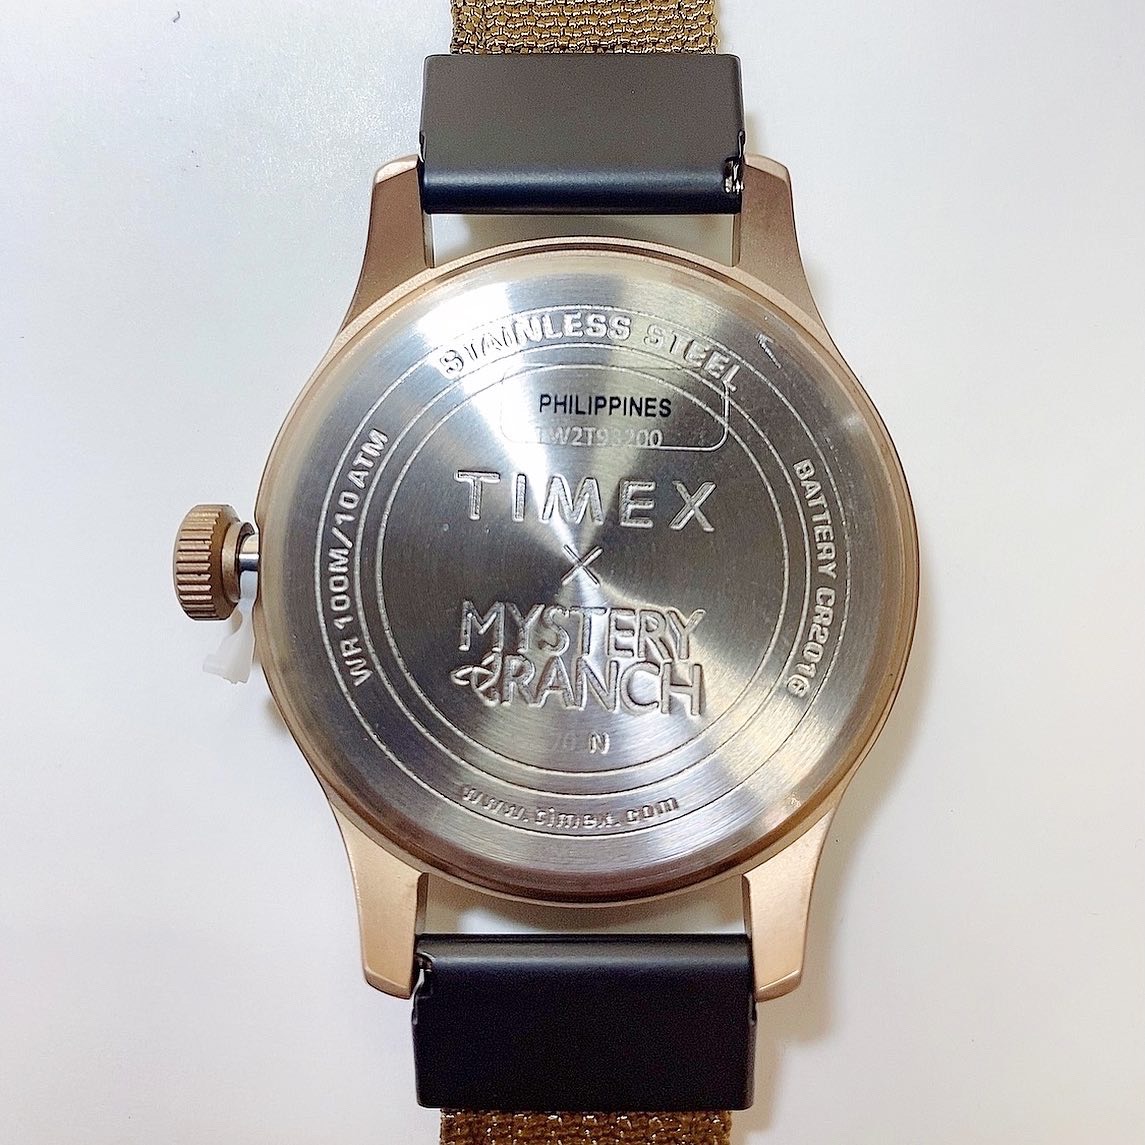 MYSTERY RANCH】×【TIMEX】コラボ時計！ミステリーランチ 